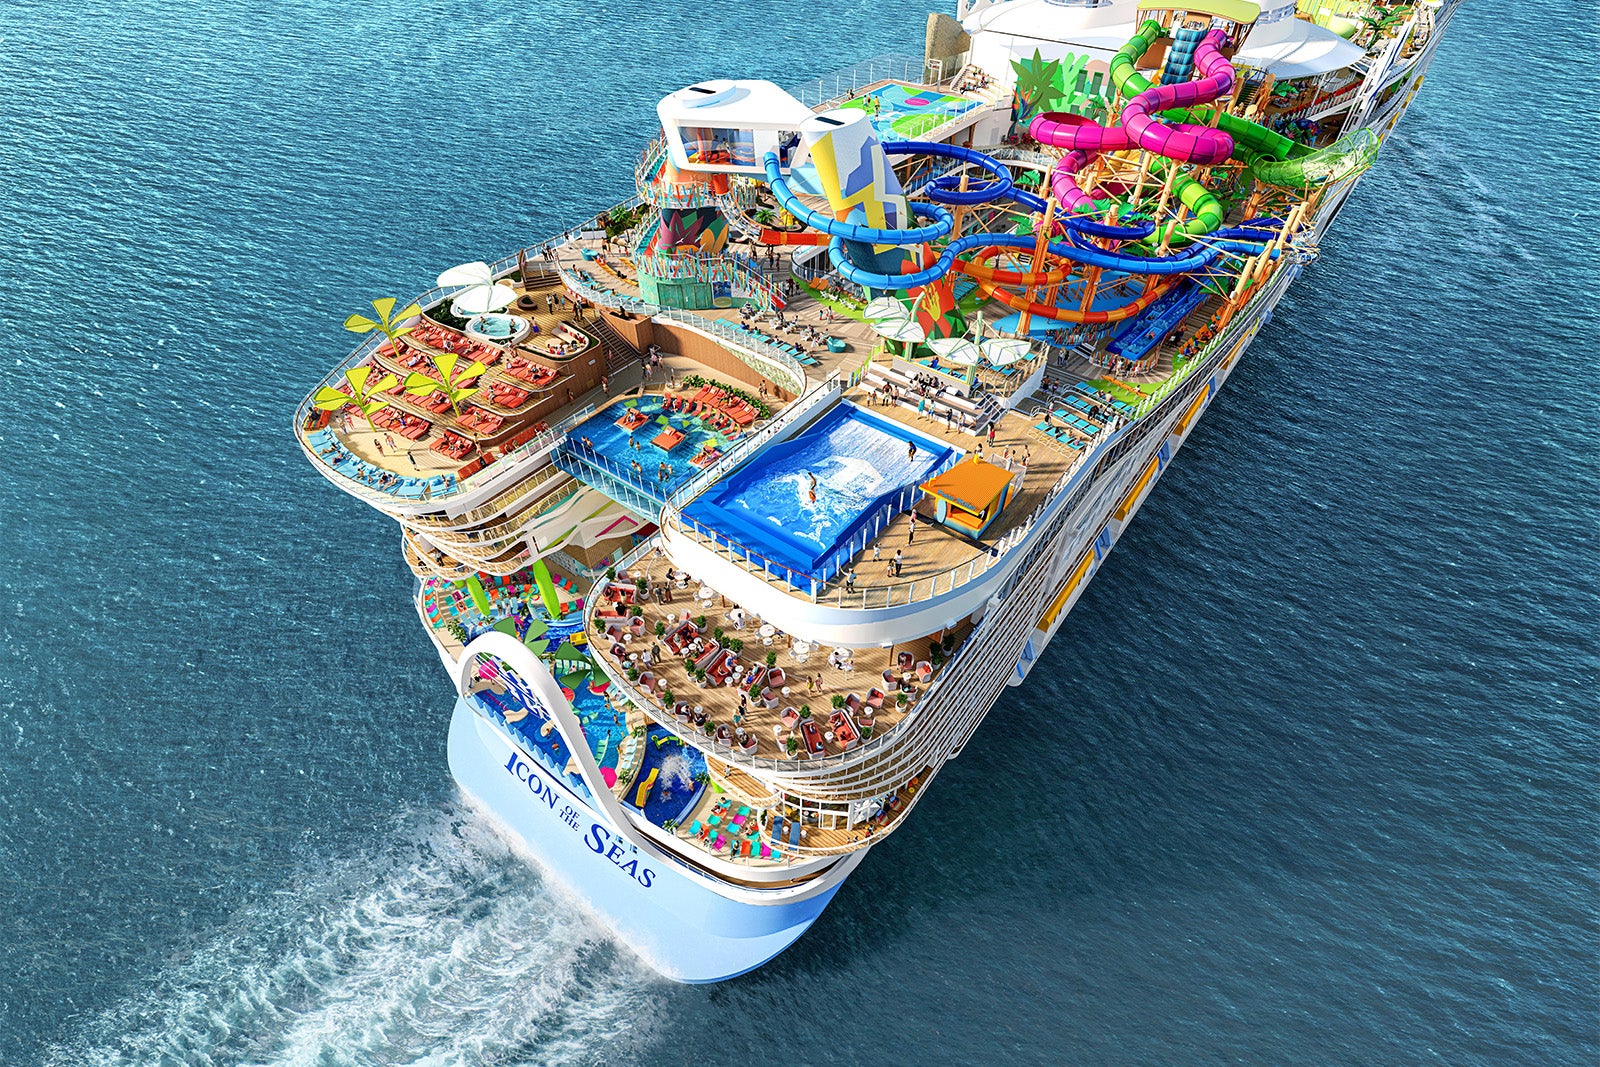 Bookings on hearth Demand for Royal Caribbean's new Icon of the Seas